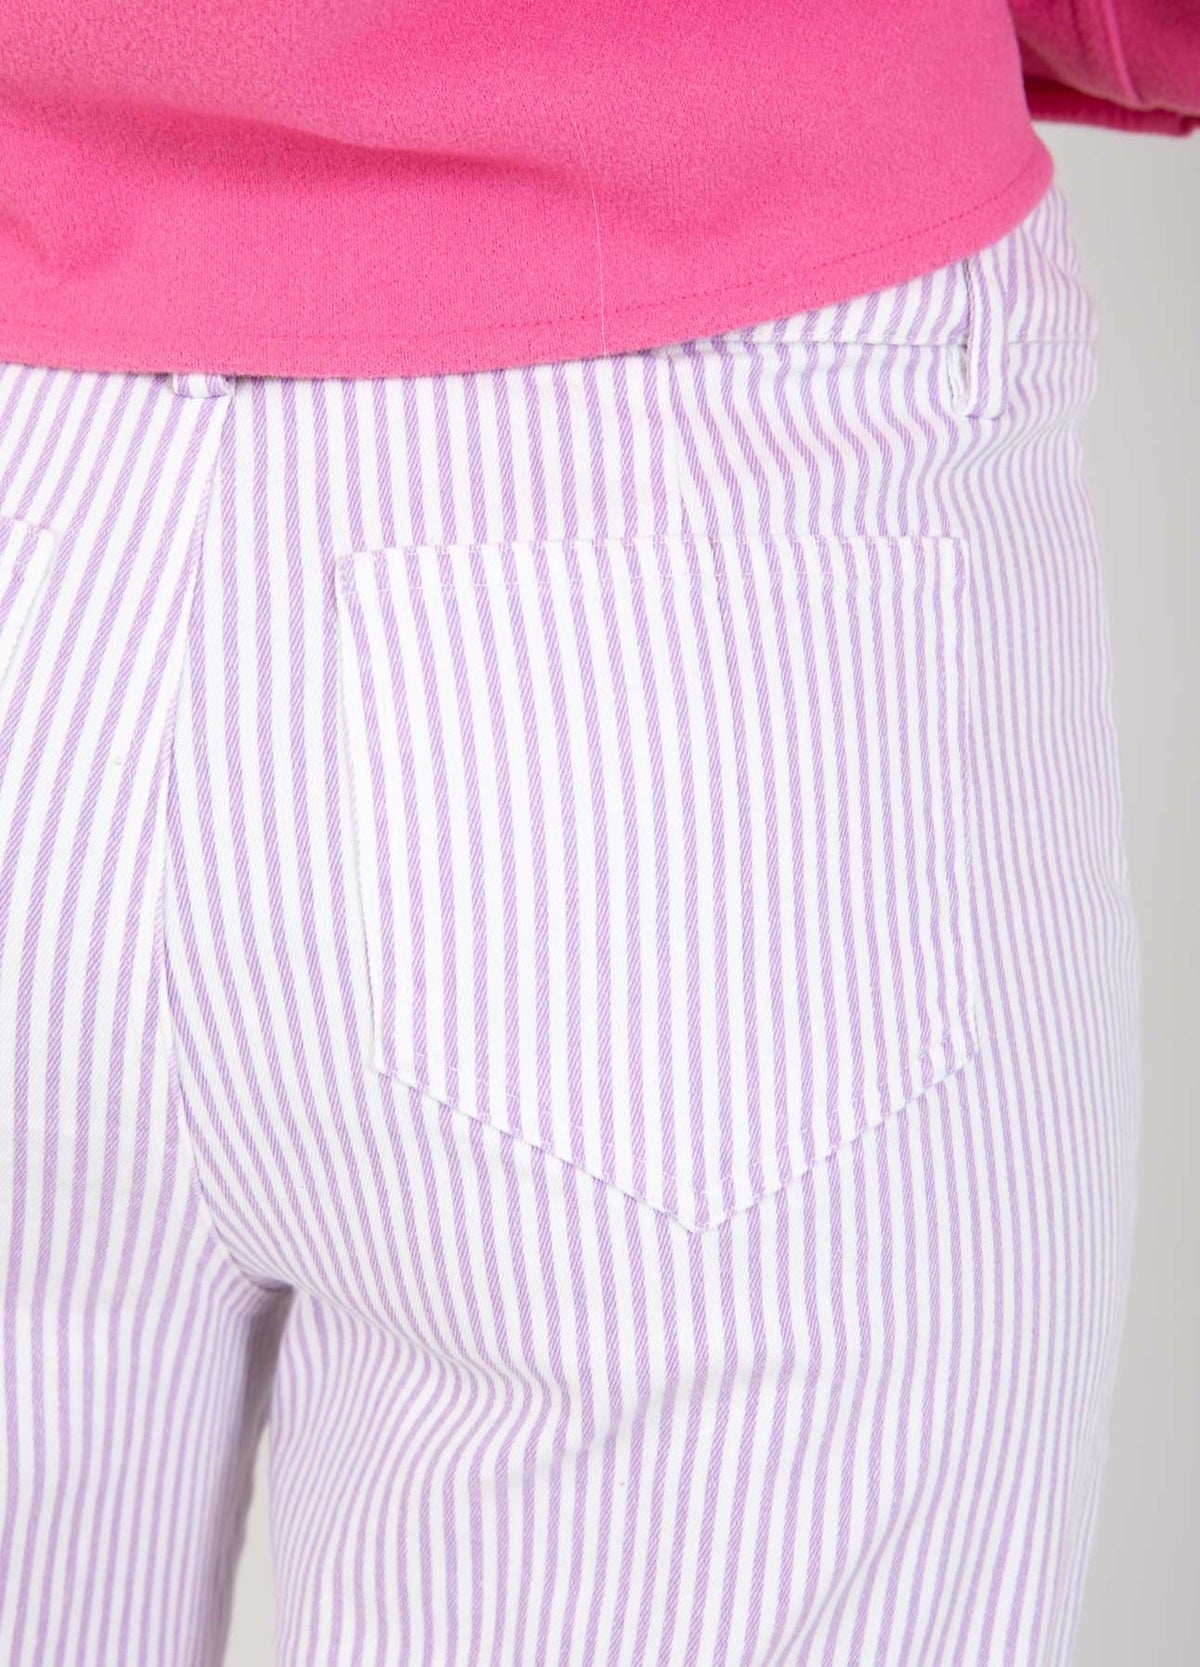 Matilde Off White and Purple Striped Trousers